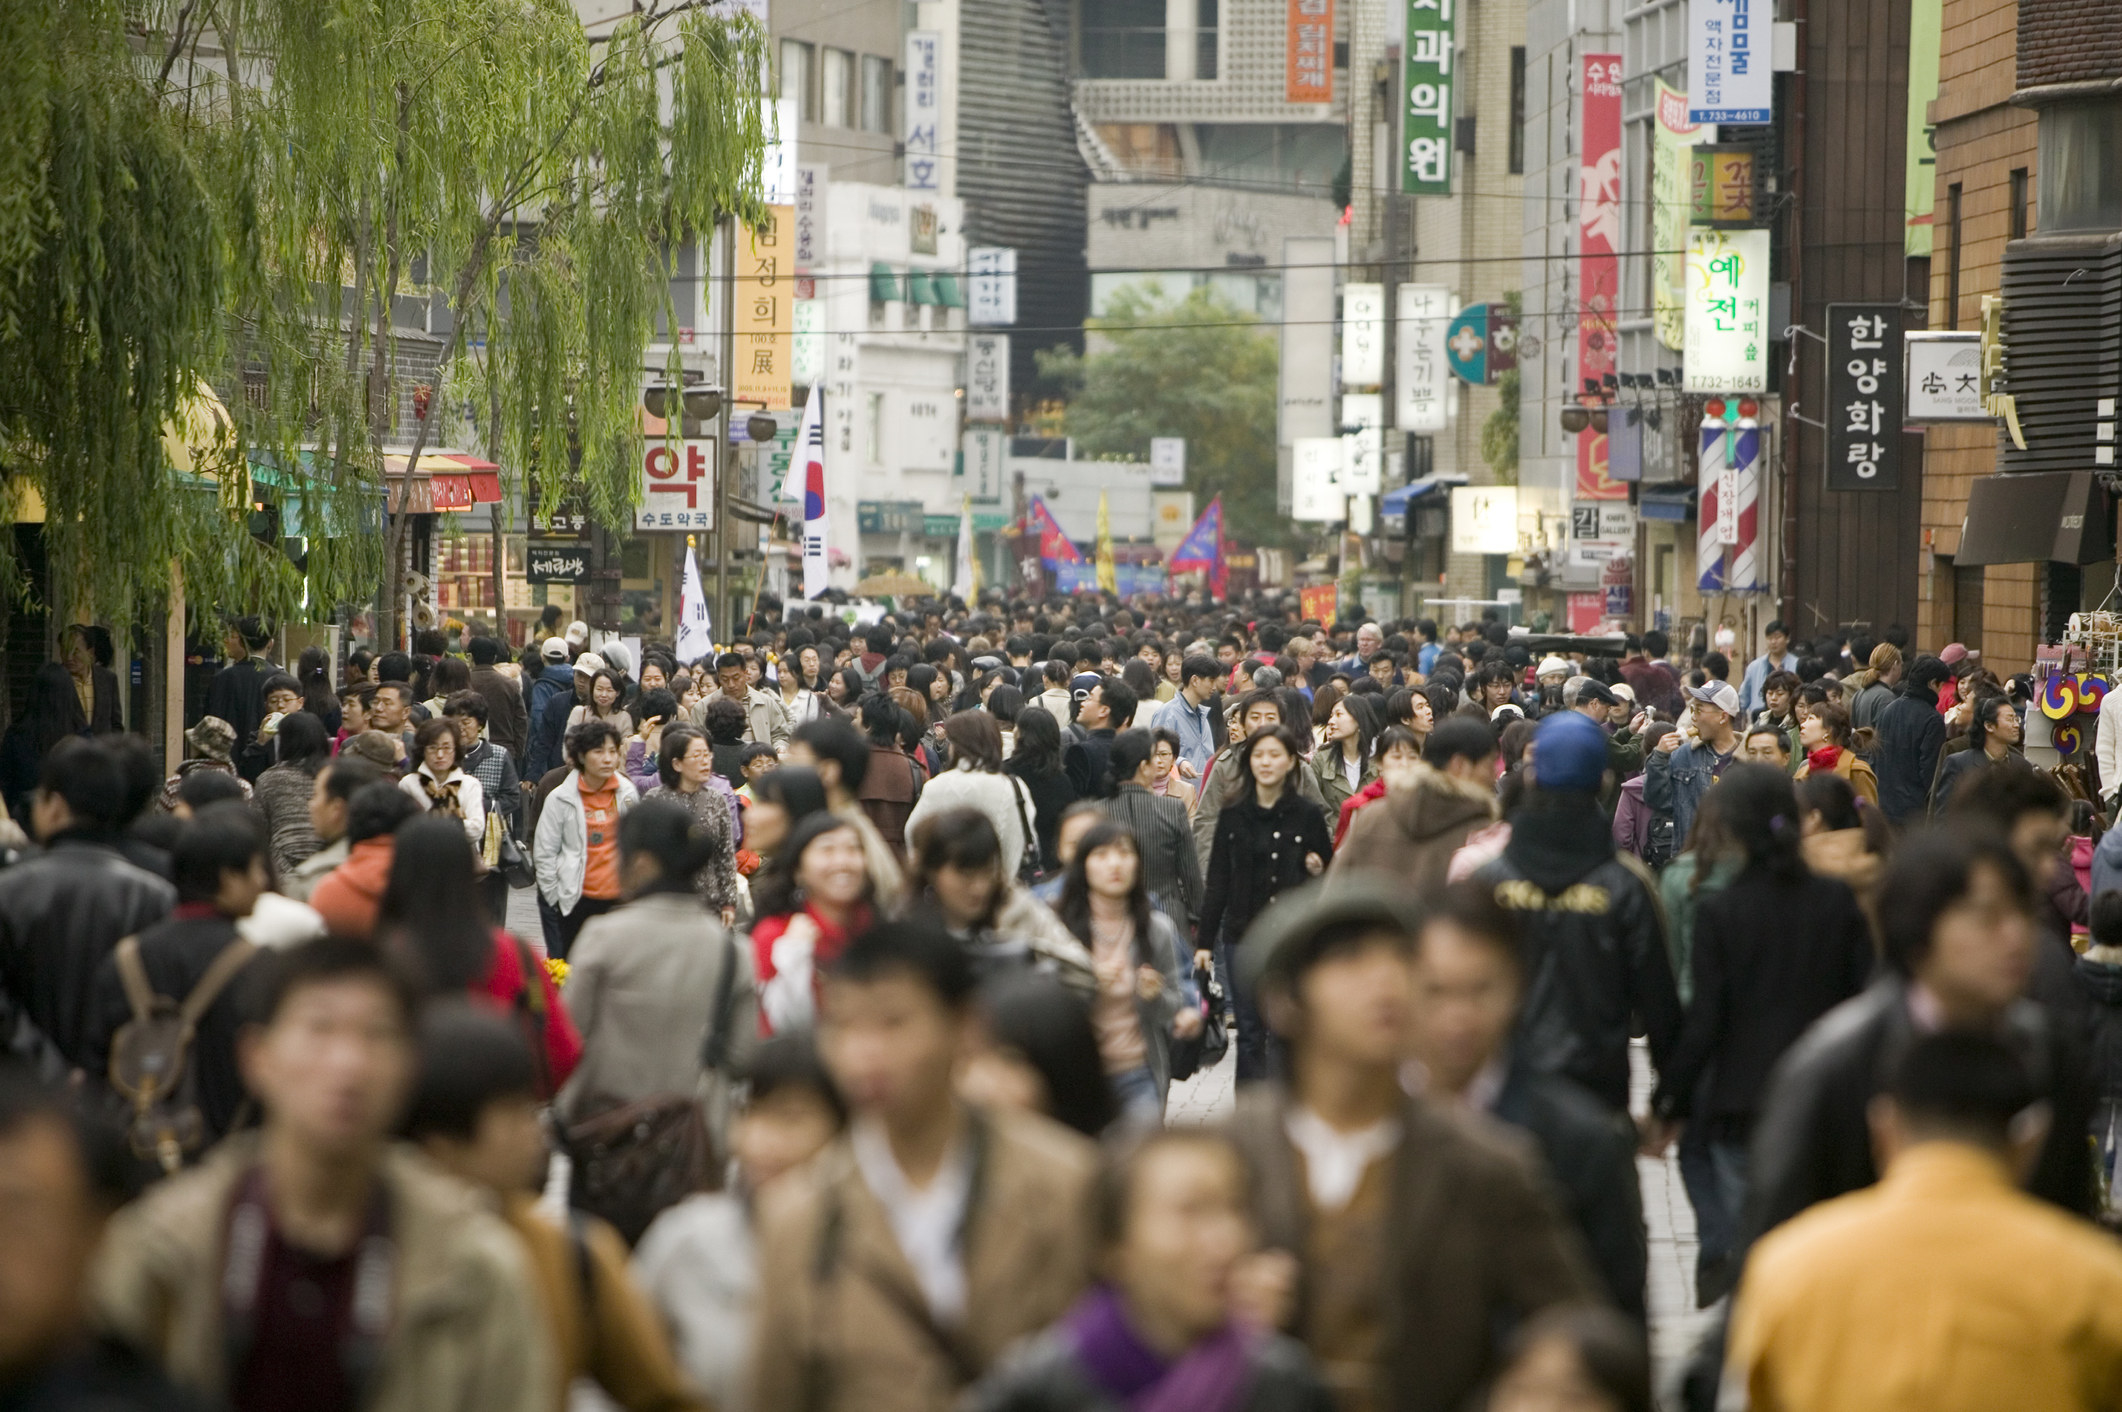 A busy street in South Korea filled with people.